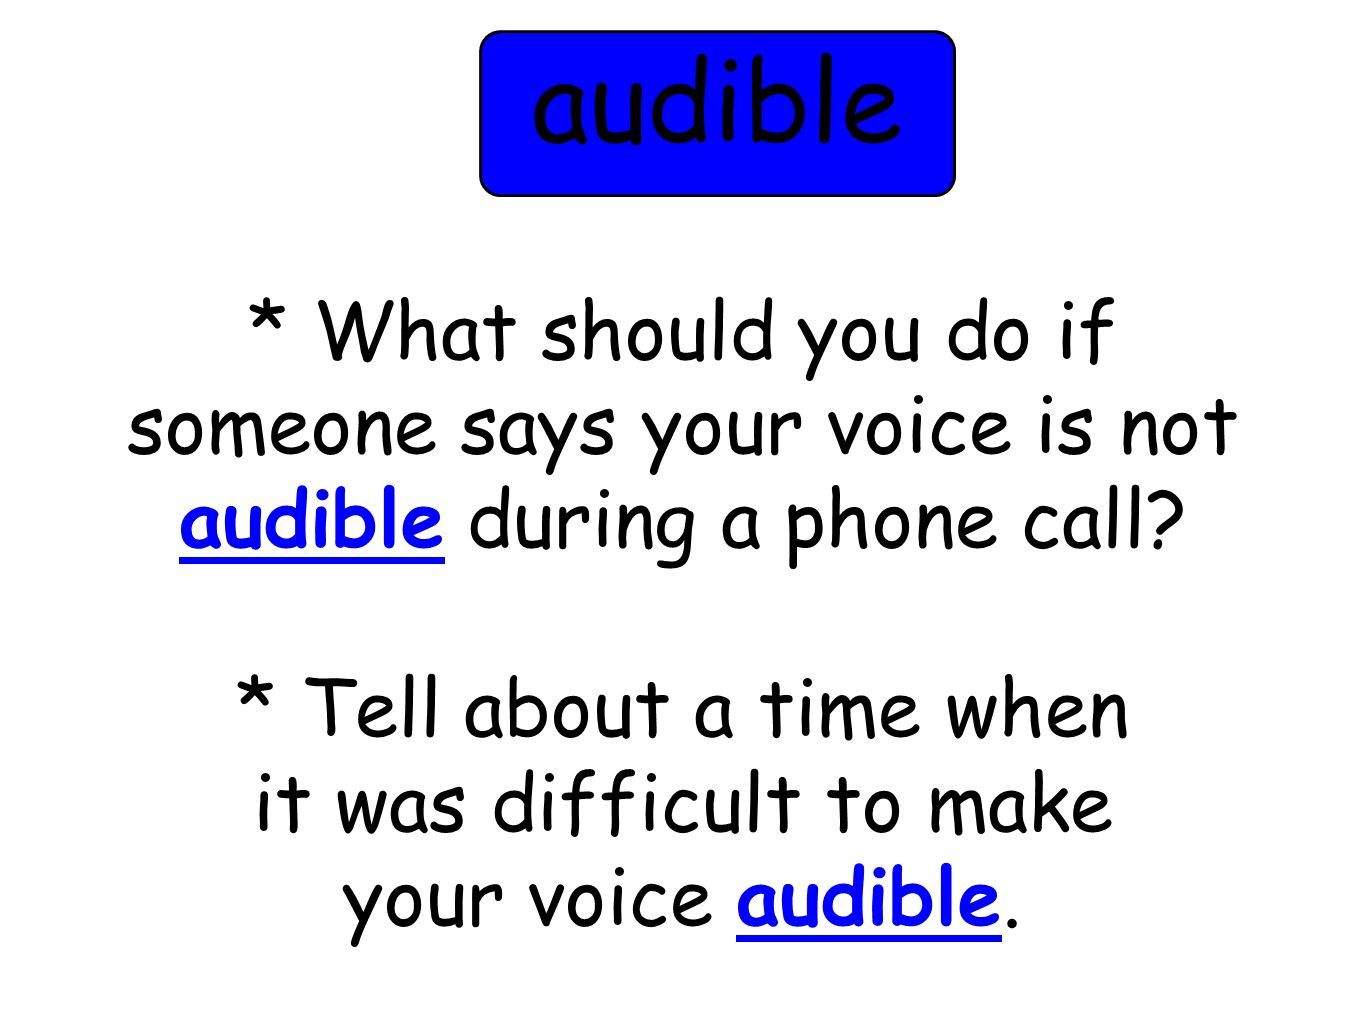 * What should you do if someone says your voice is not audible during a phone call.